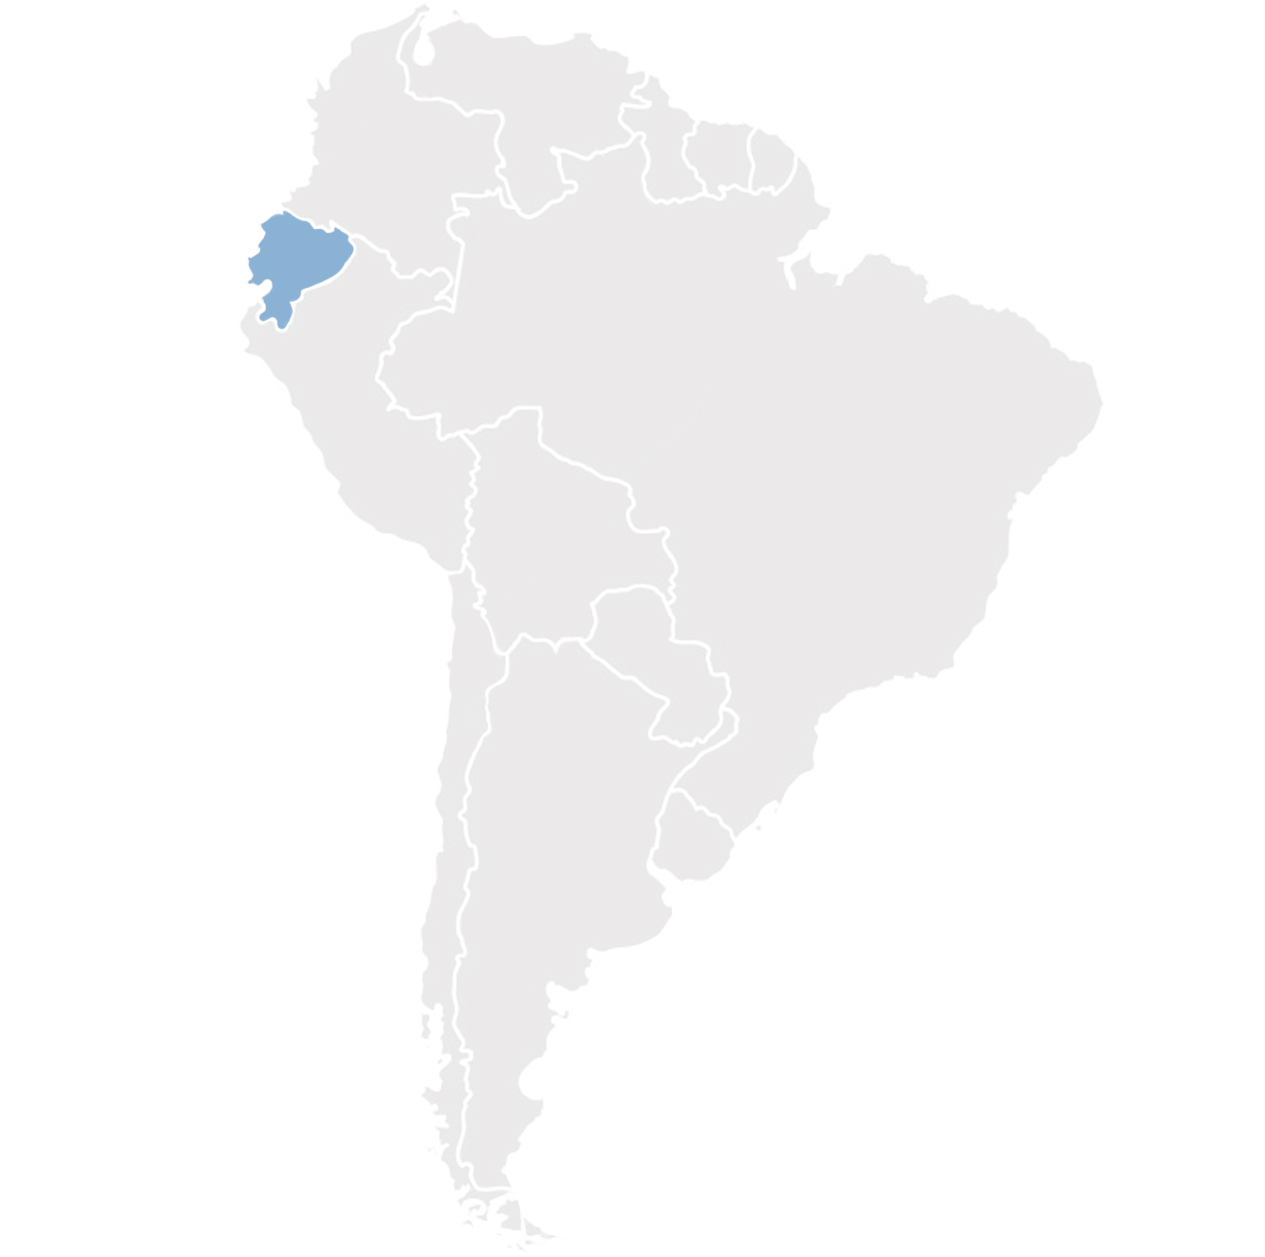 Gray map of South America with Ecuador in blue